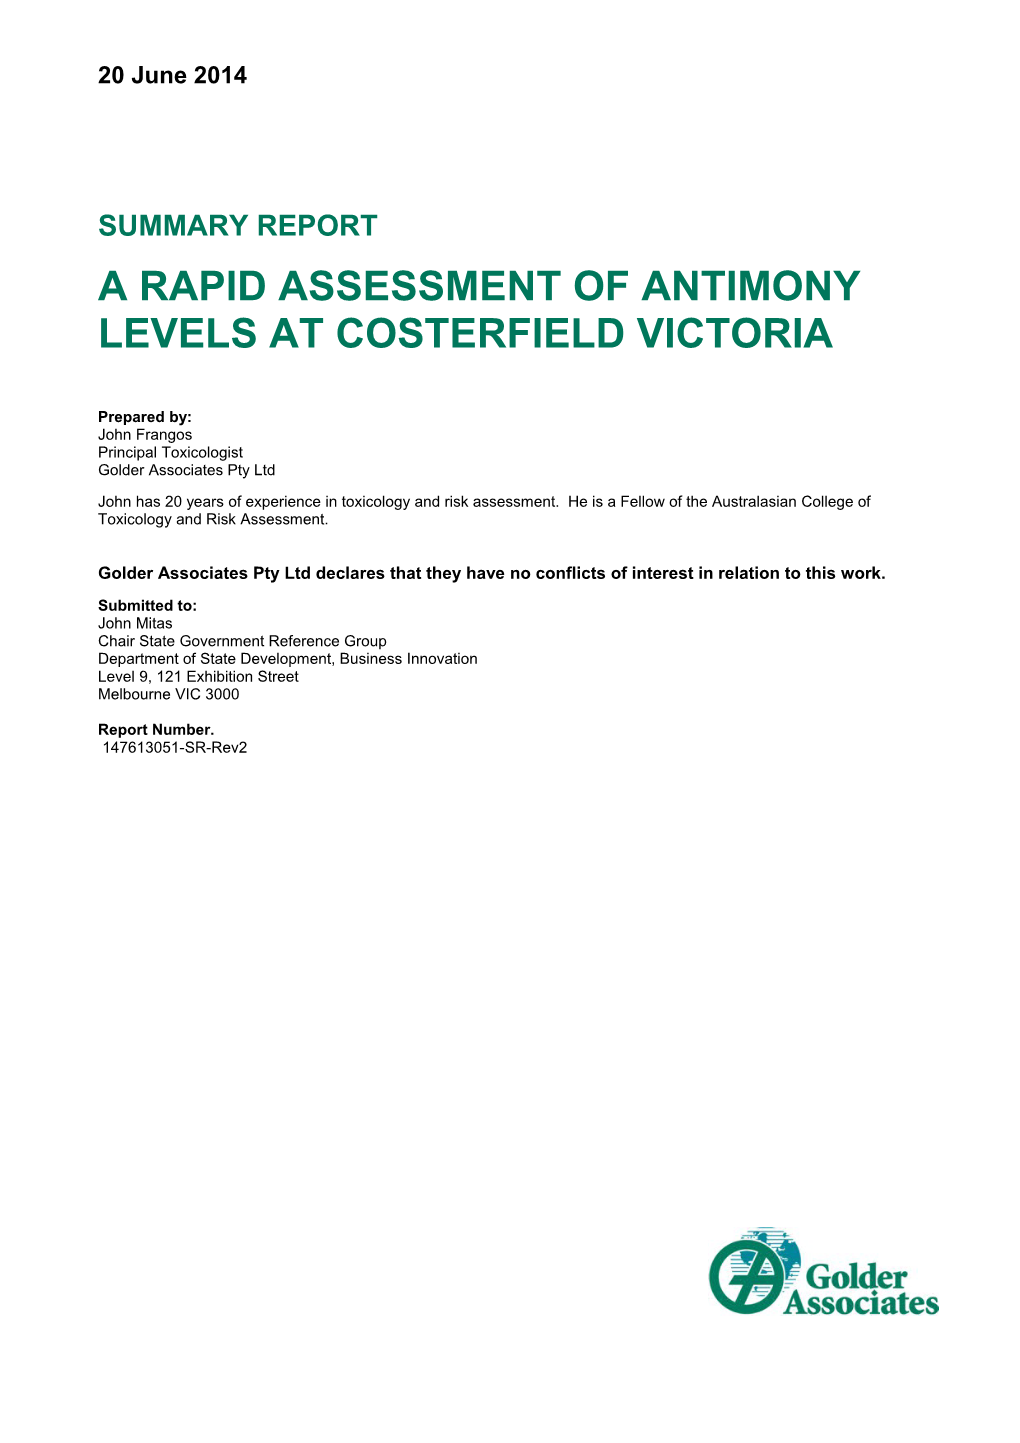 A Rapid Assessment of Antimony Levels at Costerfield Victoria